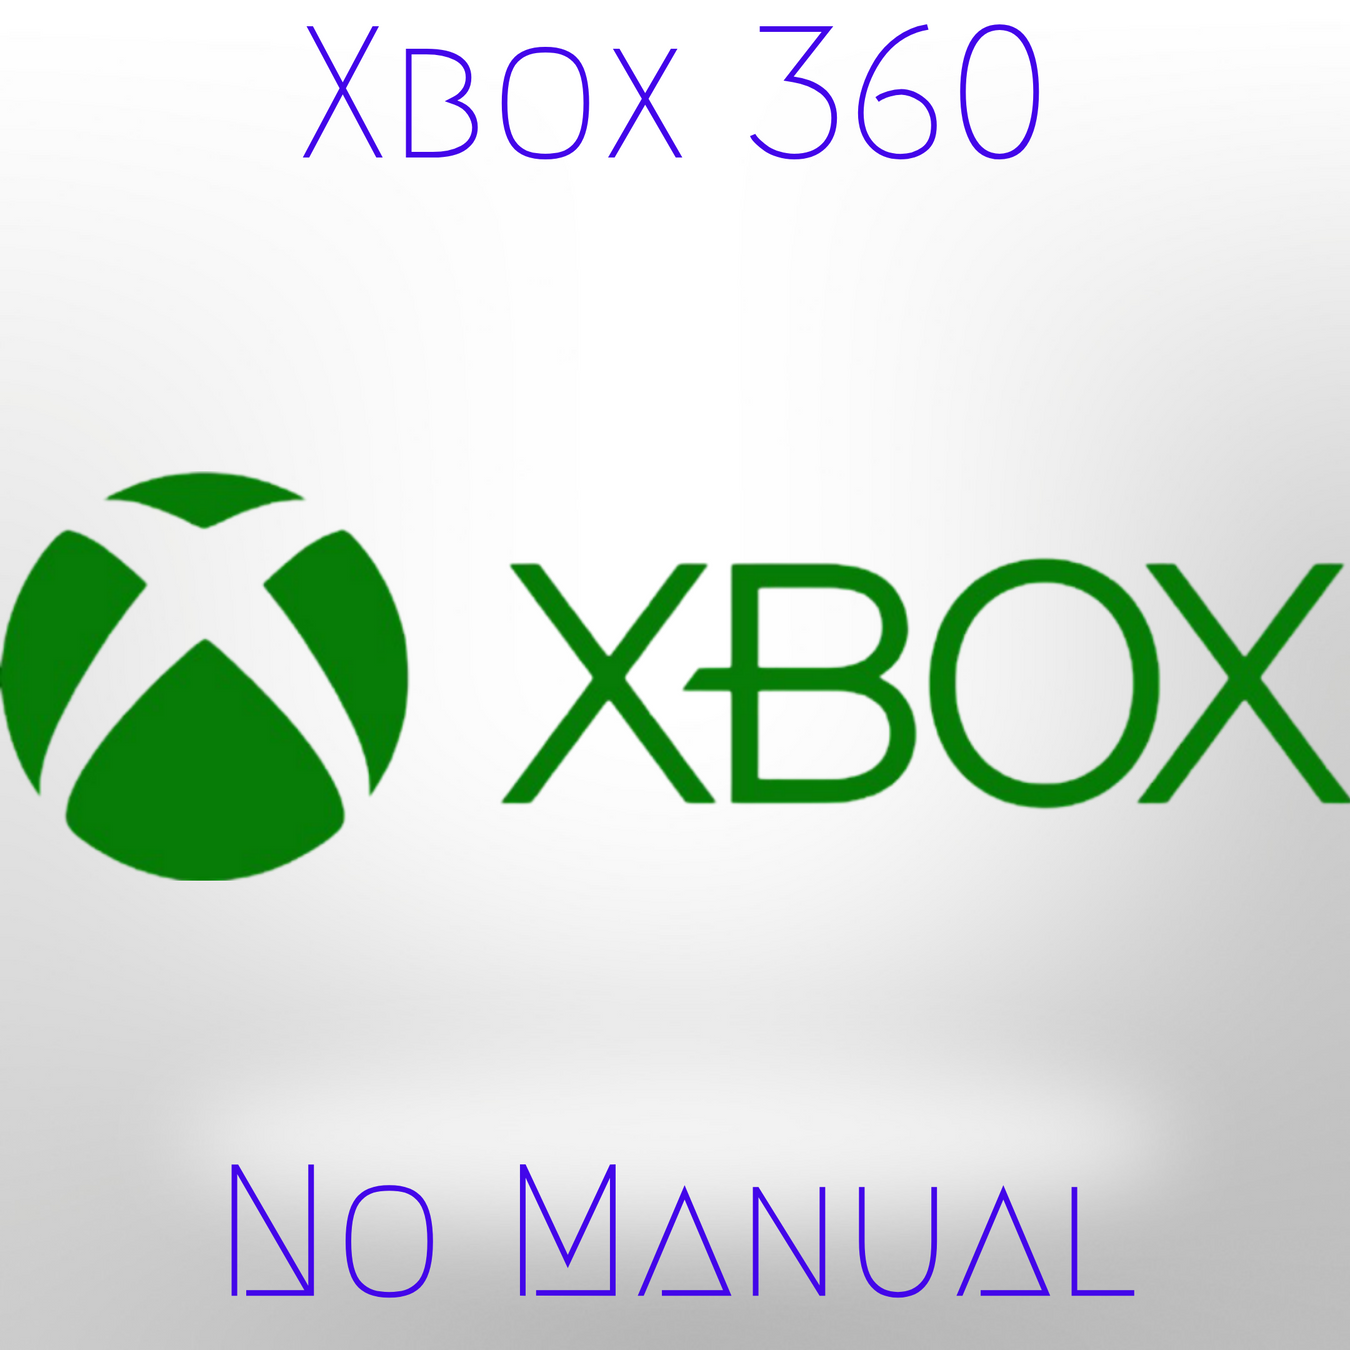 XBox 360 No Manual section